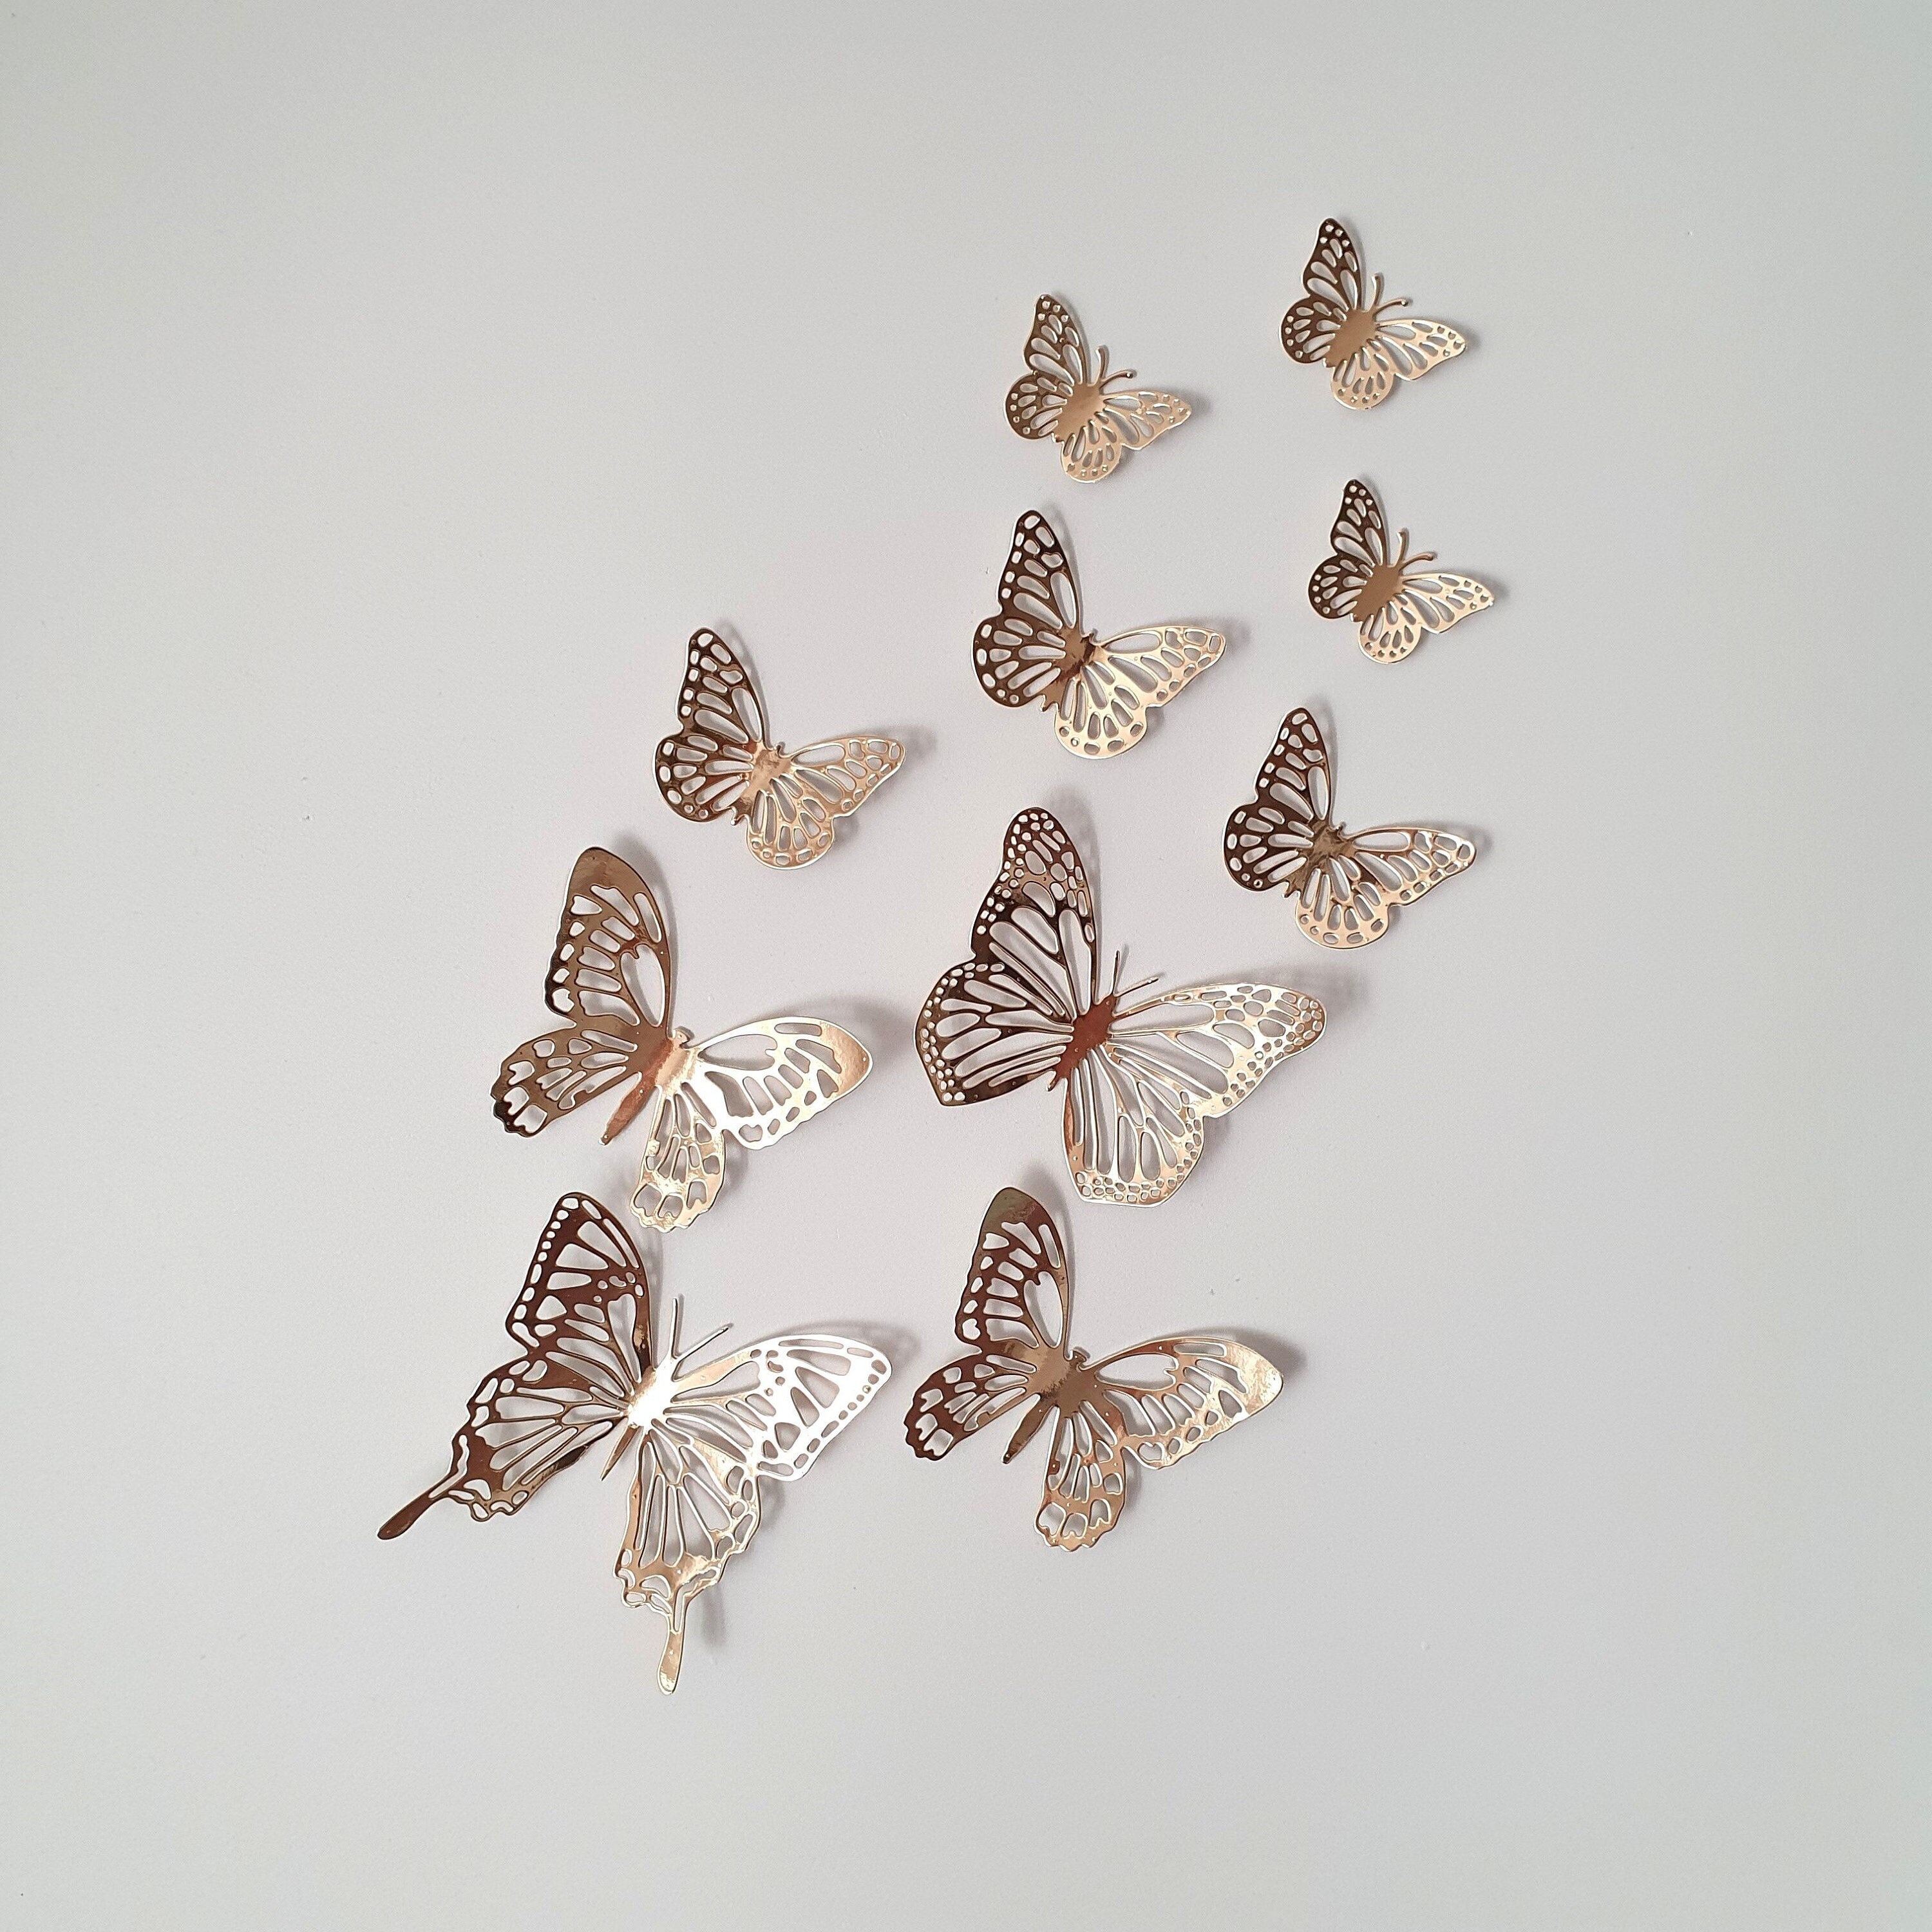 3d Butterfly Wall Decals 